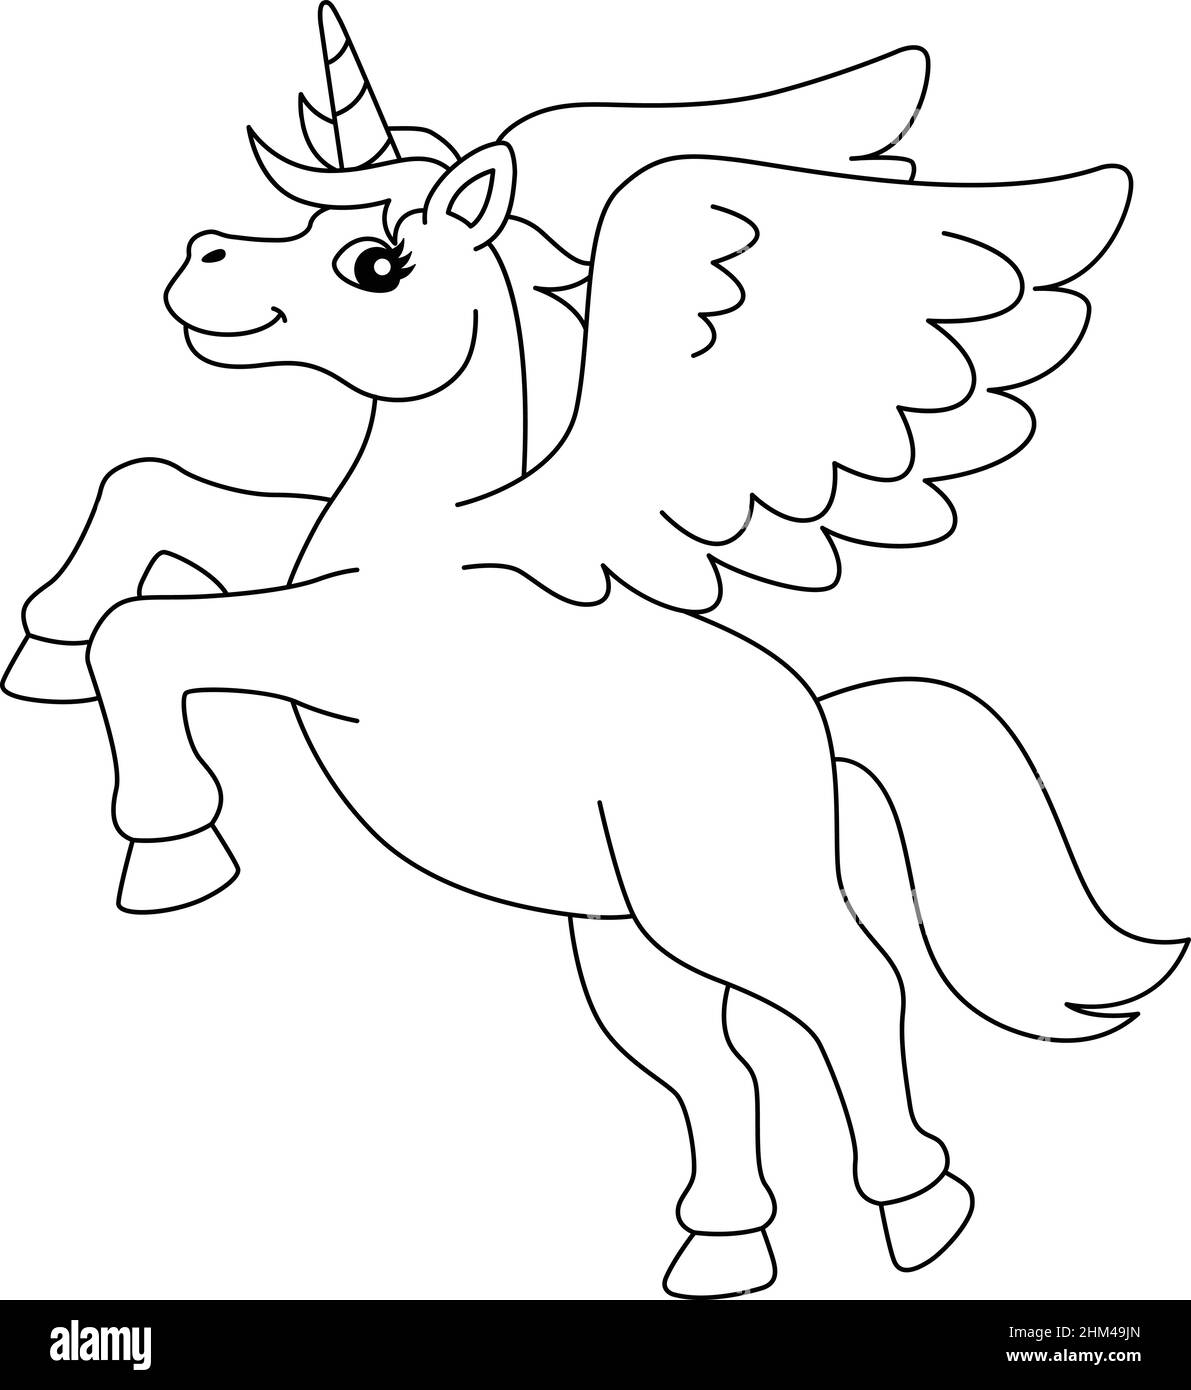 Flying Unicorn Coloring Page Isolated for Kids Stock Vector